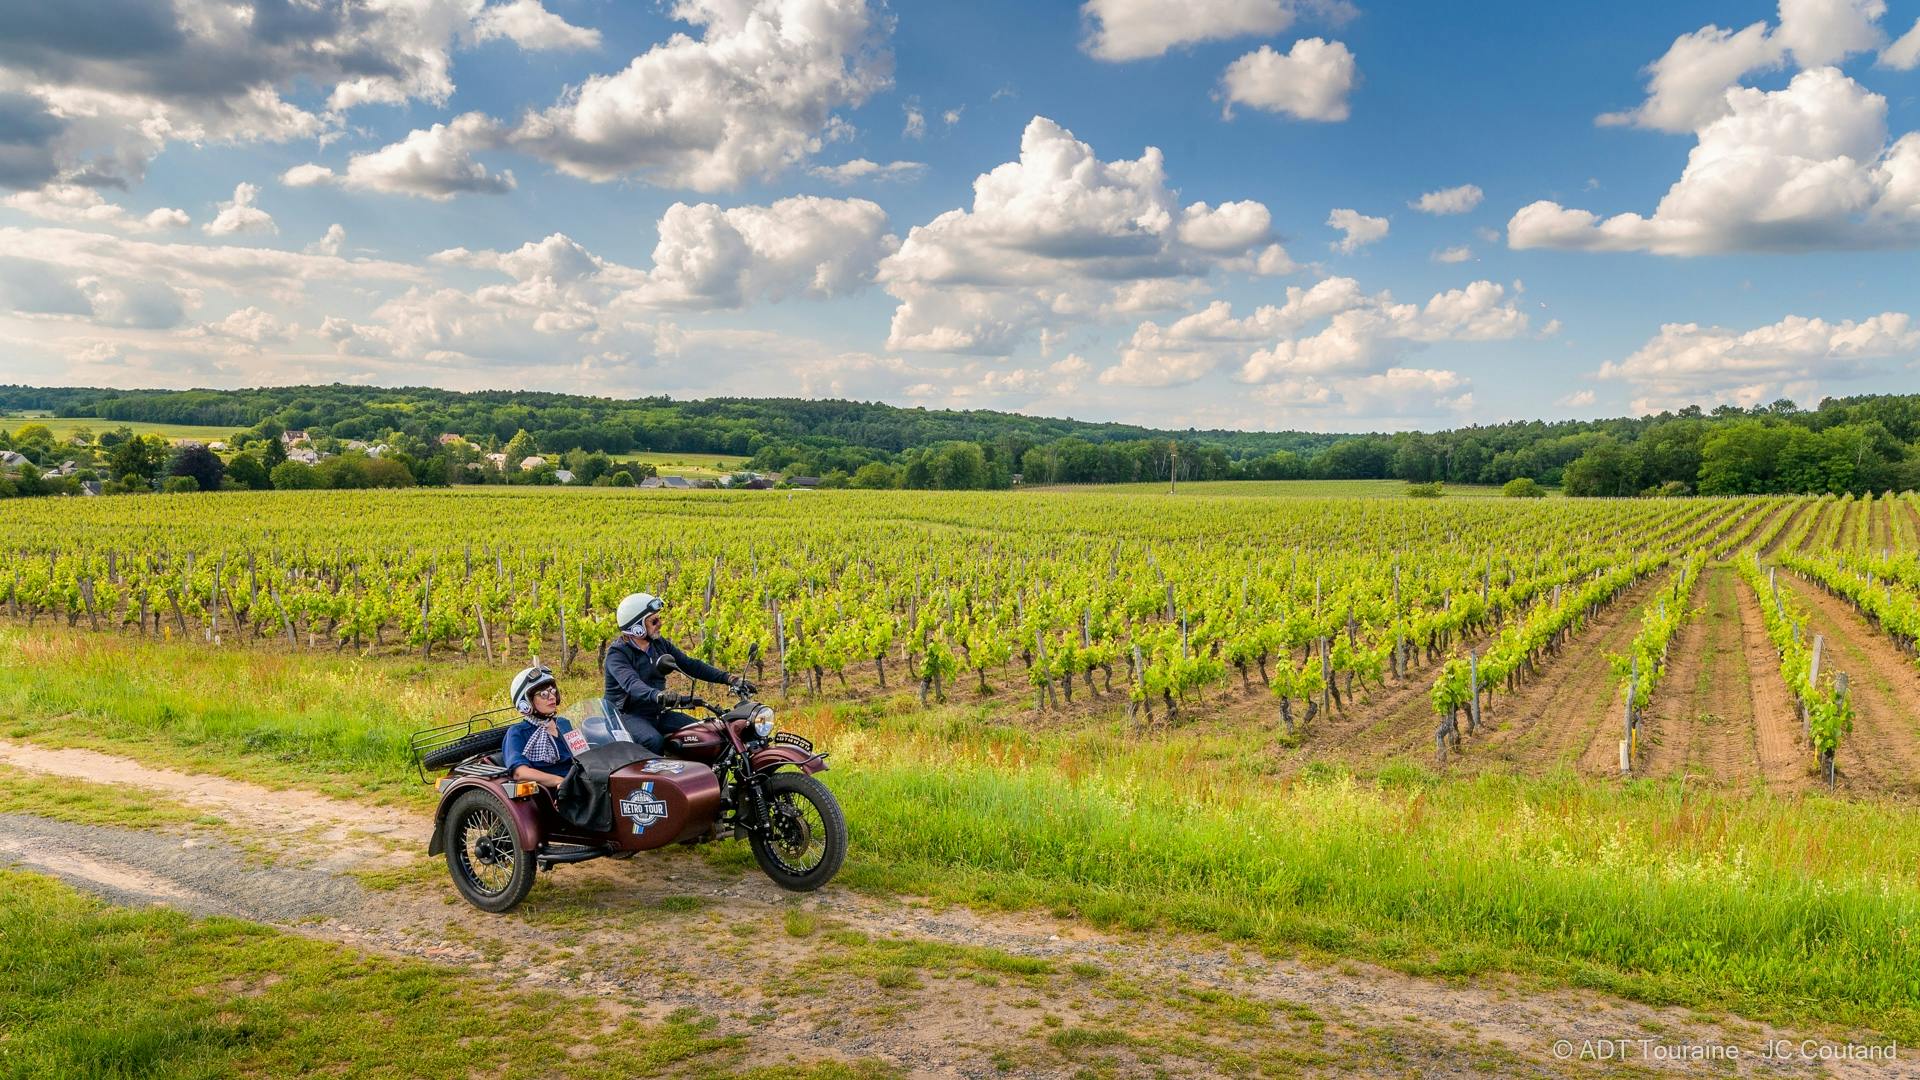 Full day sidecar tour of the Loire Valley from Tours Musement